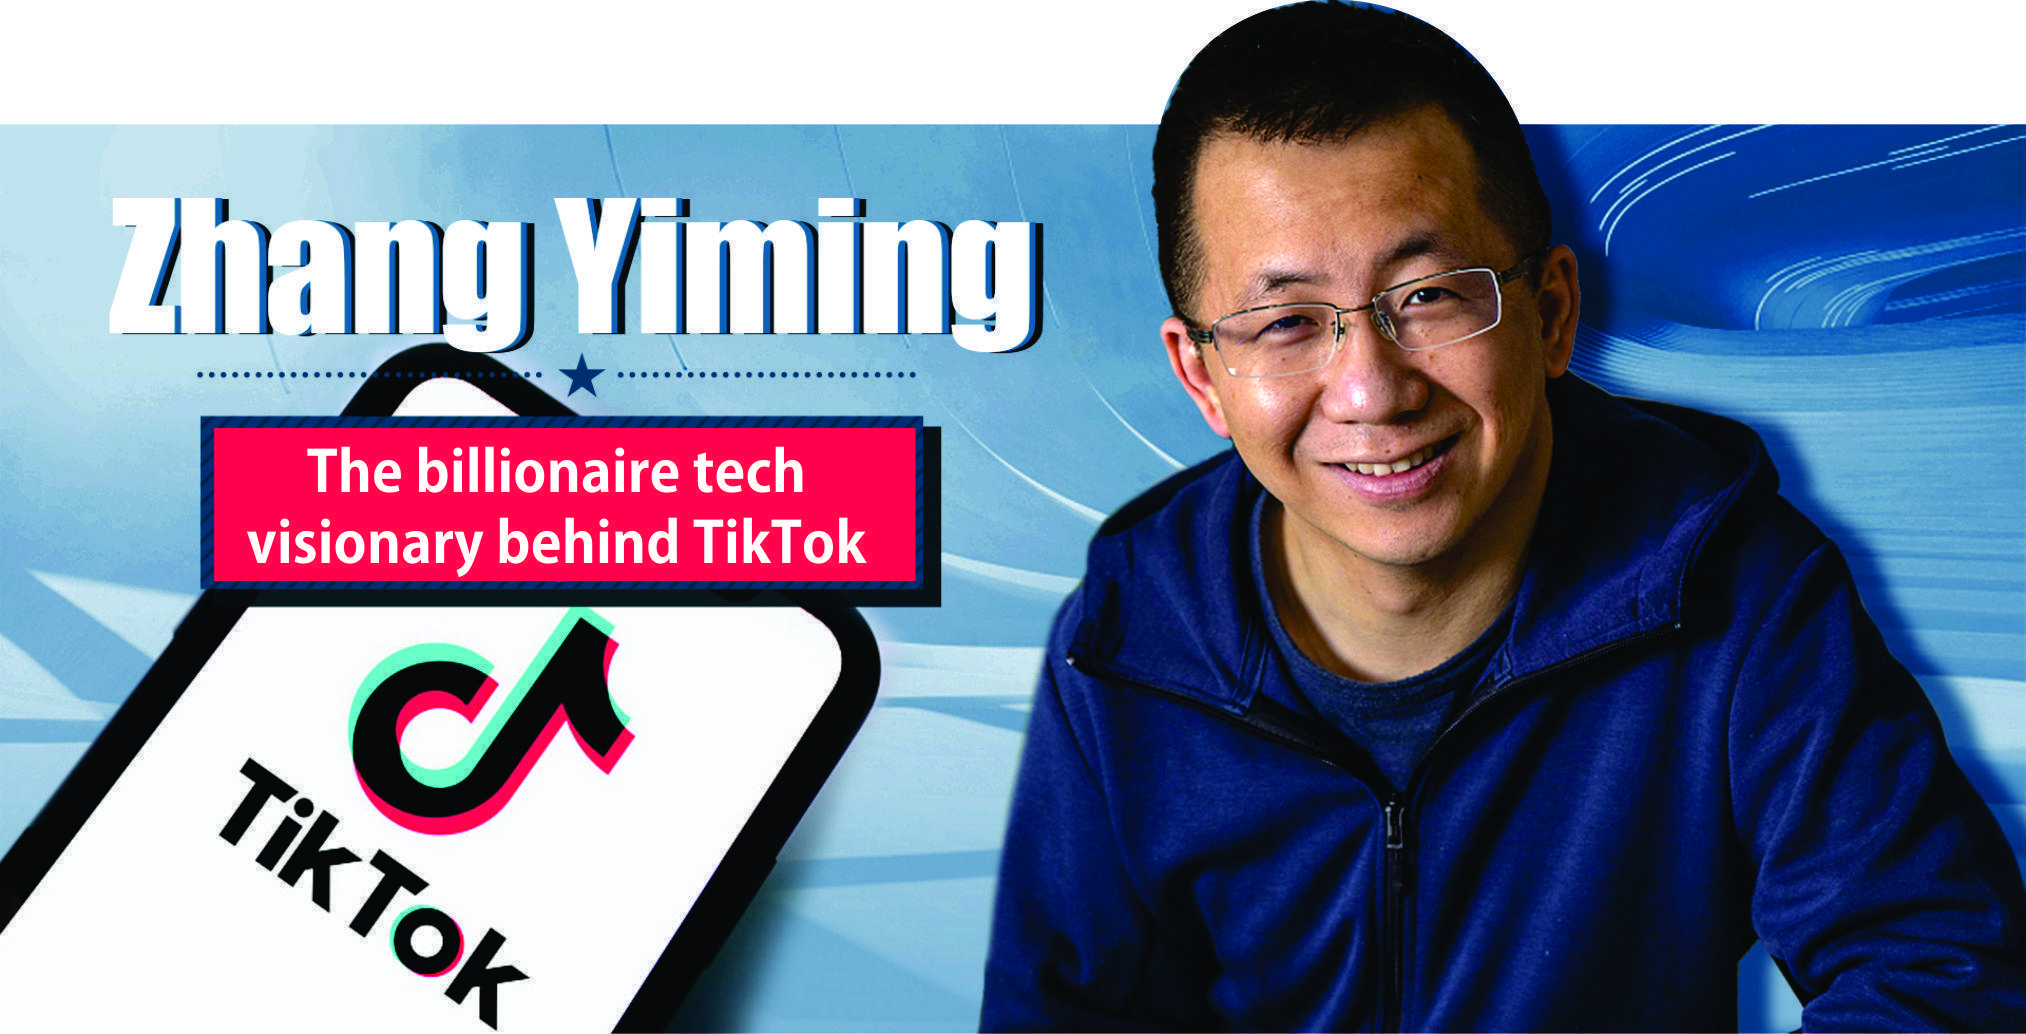 You are currently viewing Zhang Yiming The billionaire tech visionary behind TikTok